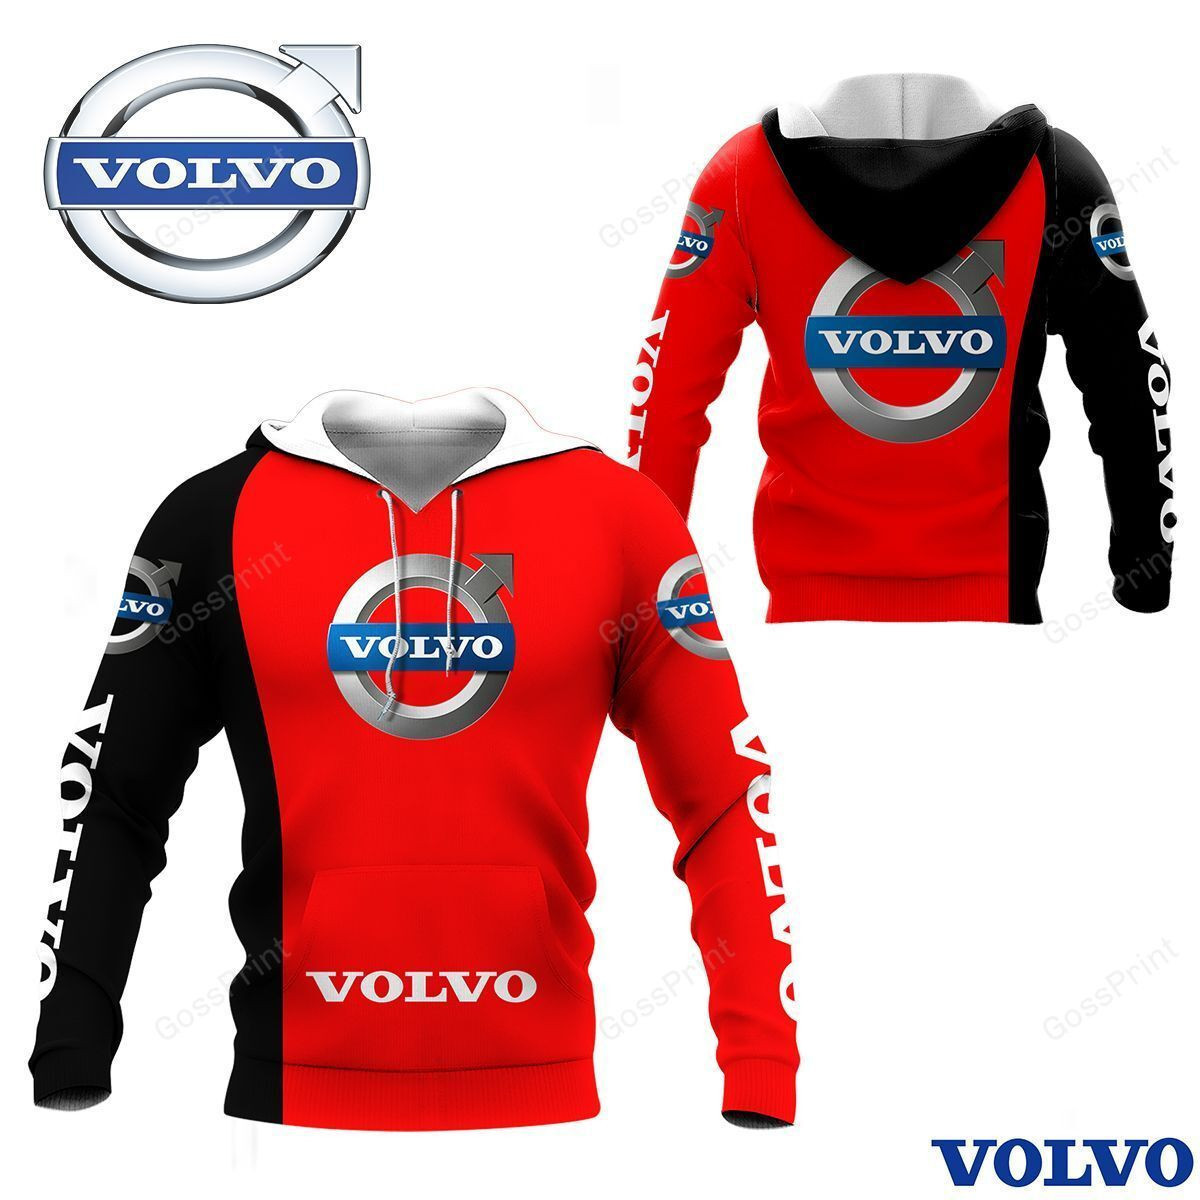 3D ALL OVER VOLVO TRUCK SHIRT VER 9